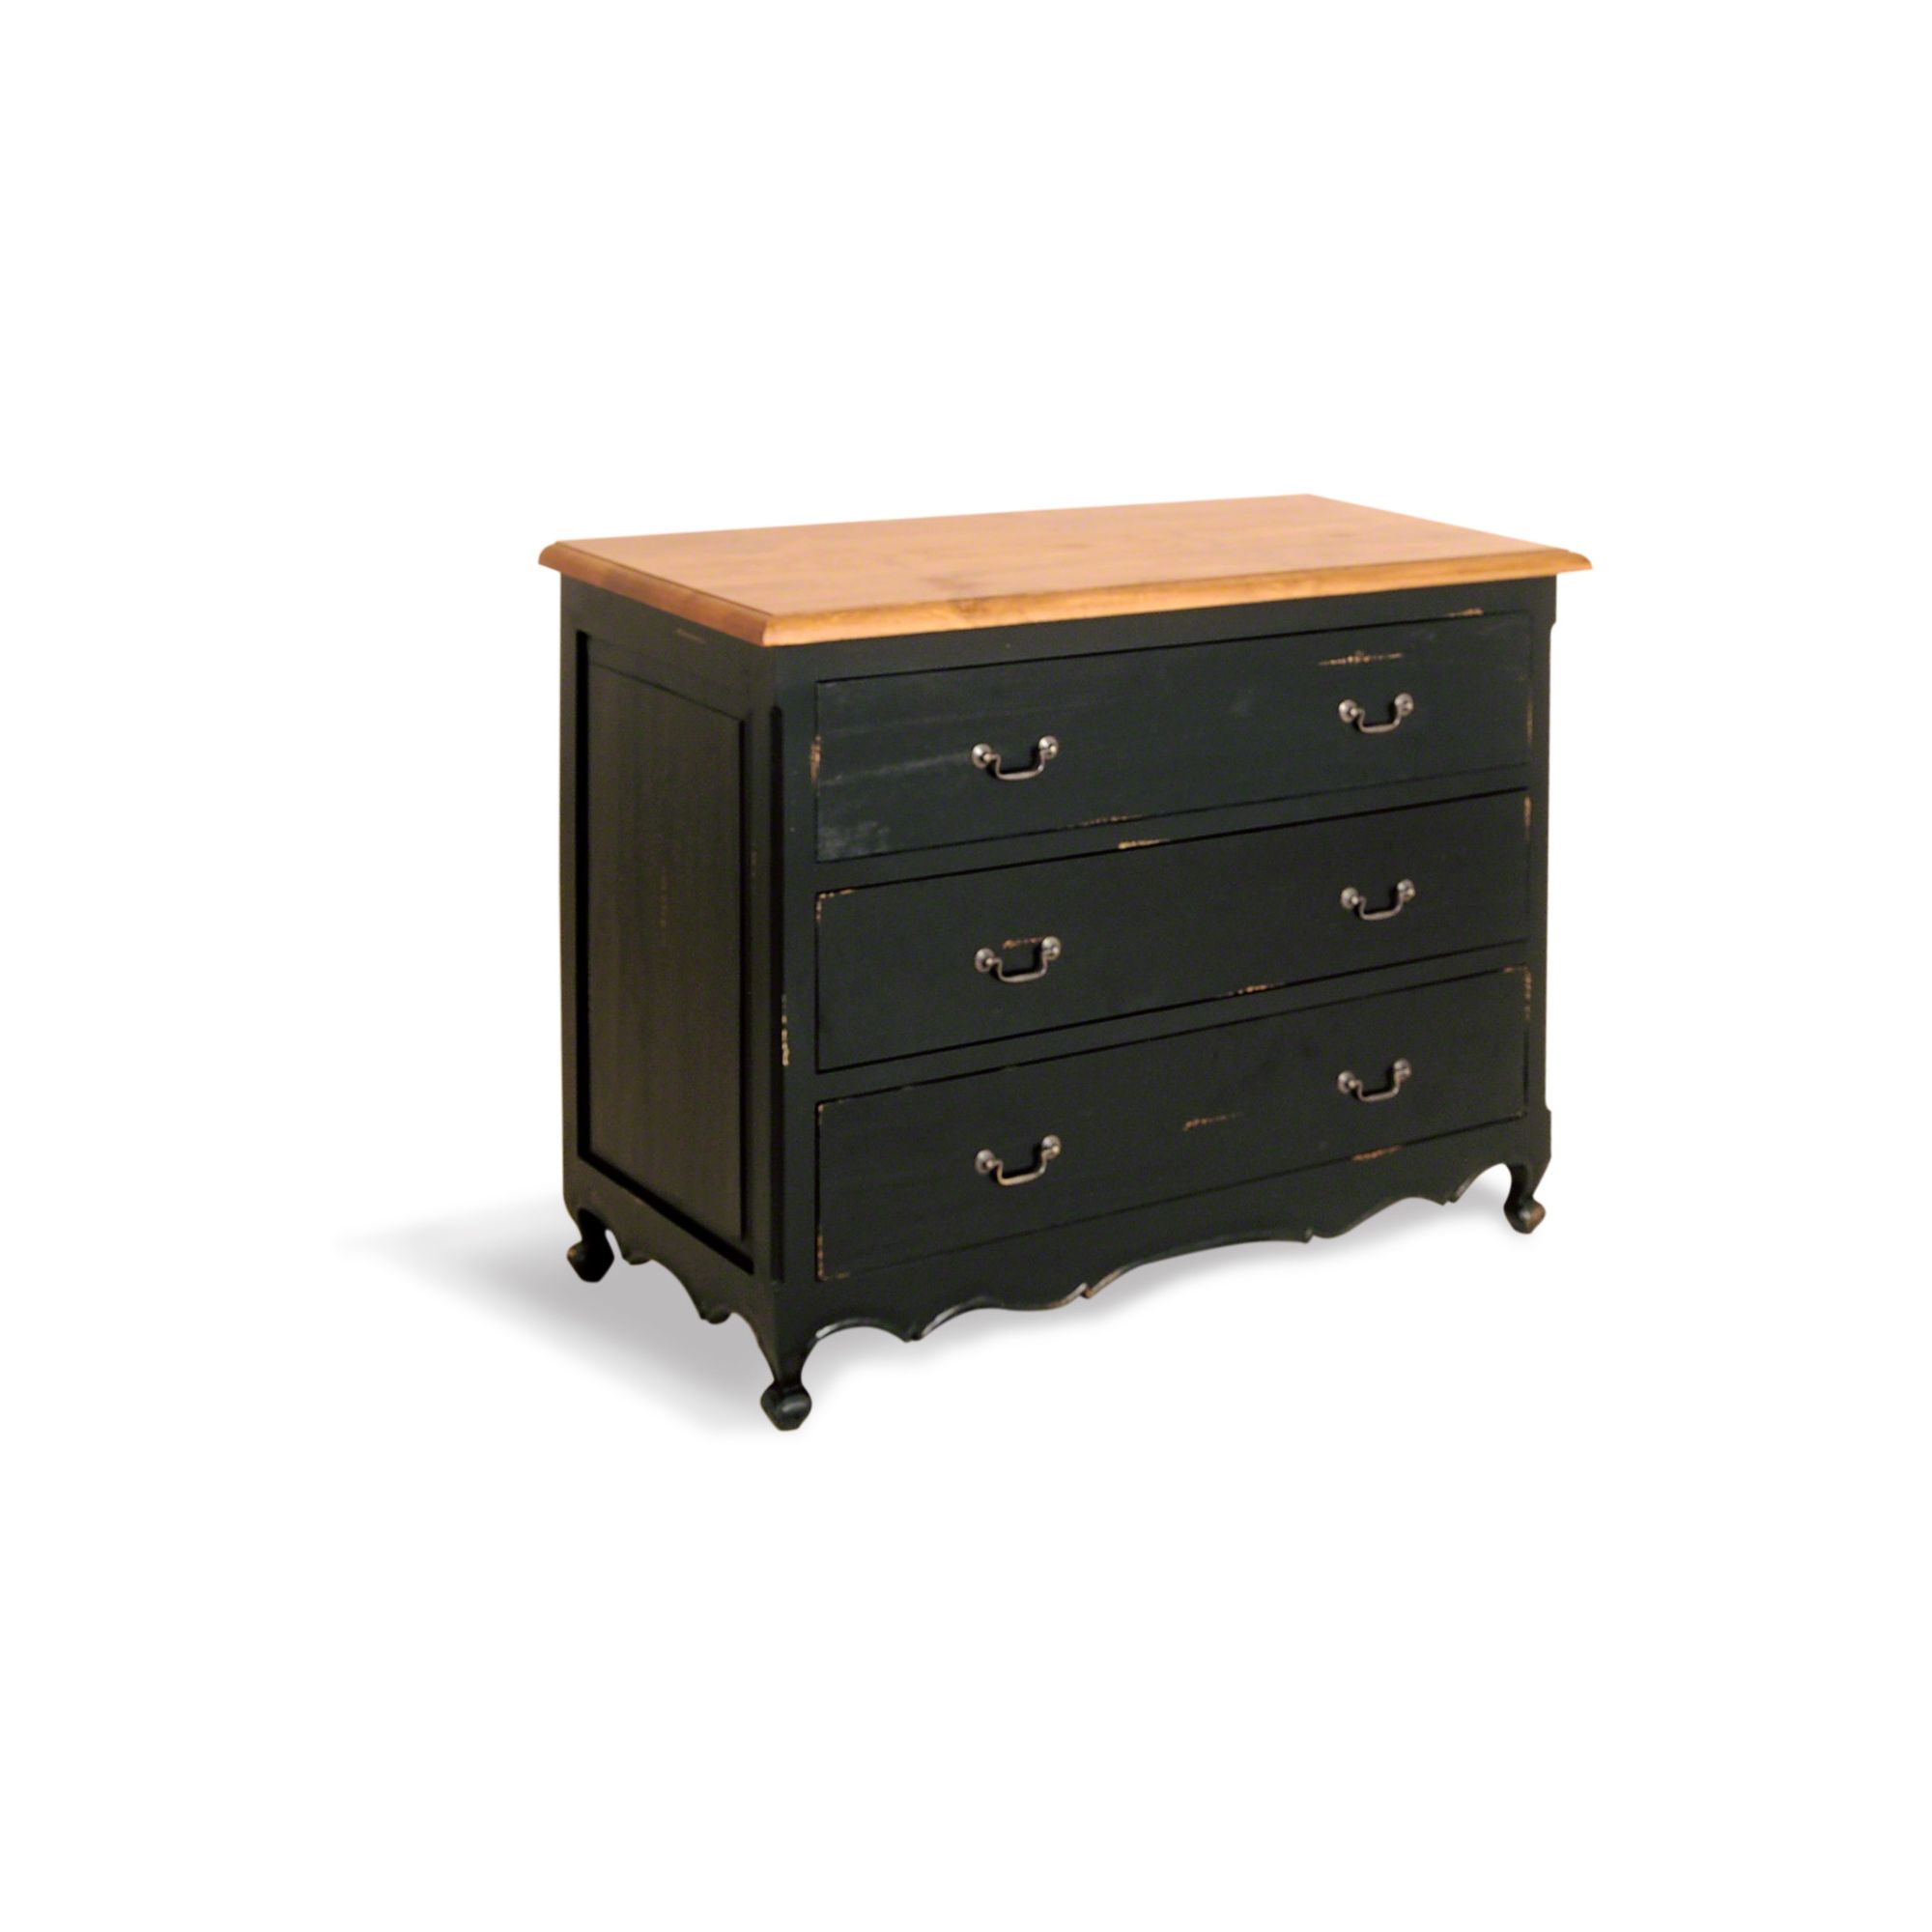 Oceans Apart Painted Provence Three Drawer Dresser in Antique Black at Tesco Direct